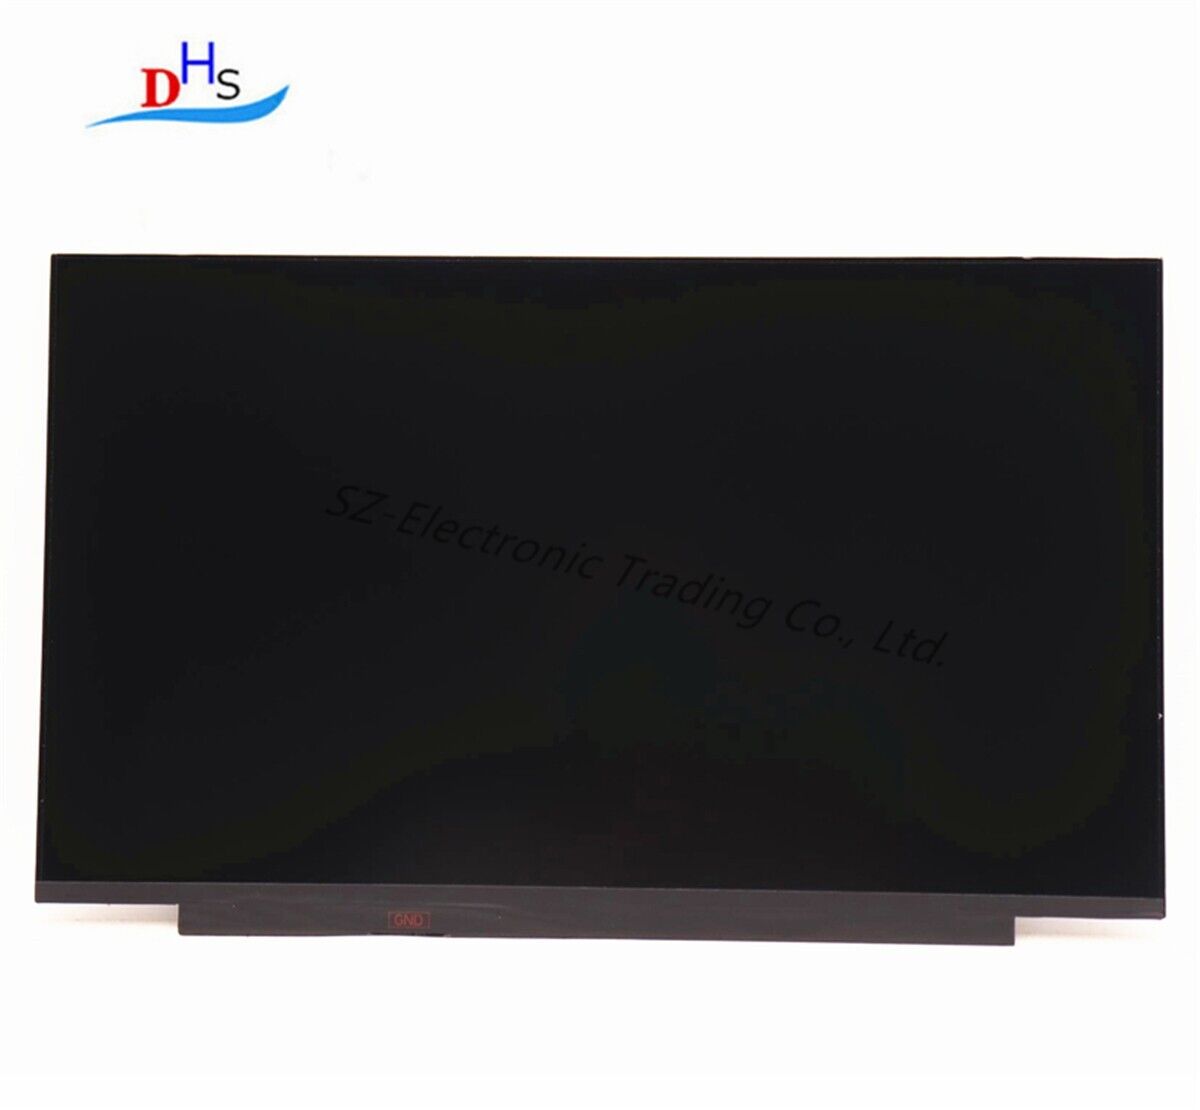 5D10V82435 For Lenovo Thinkpad T15p P15v Gen 3 E15 Gen 4 FHD No-Touch LCD screen